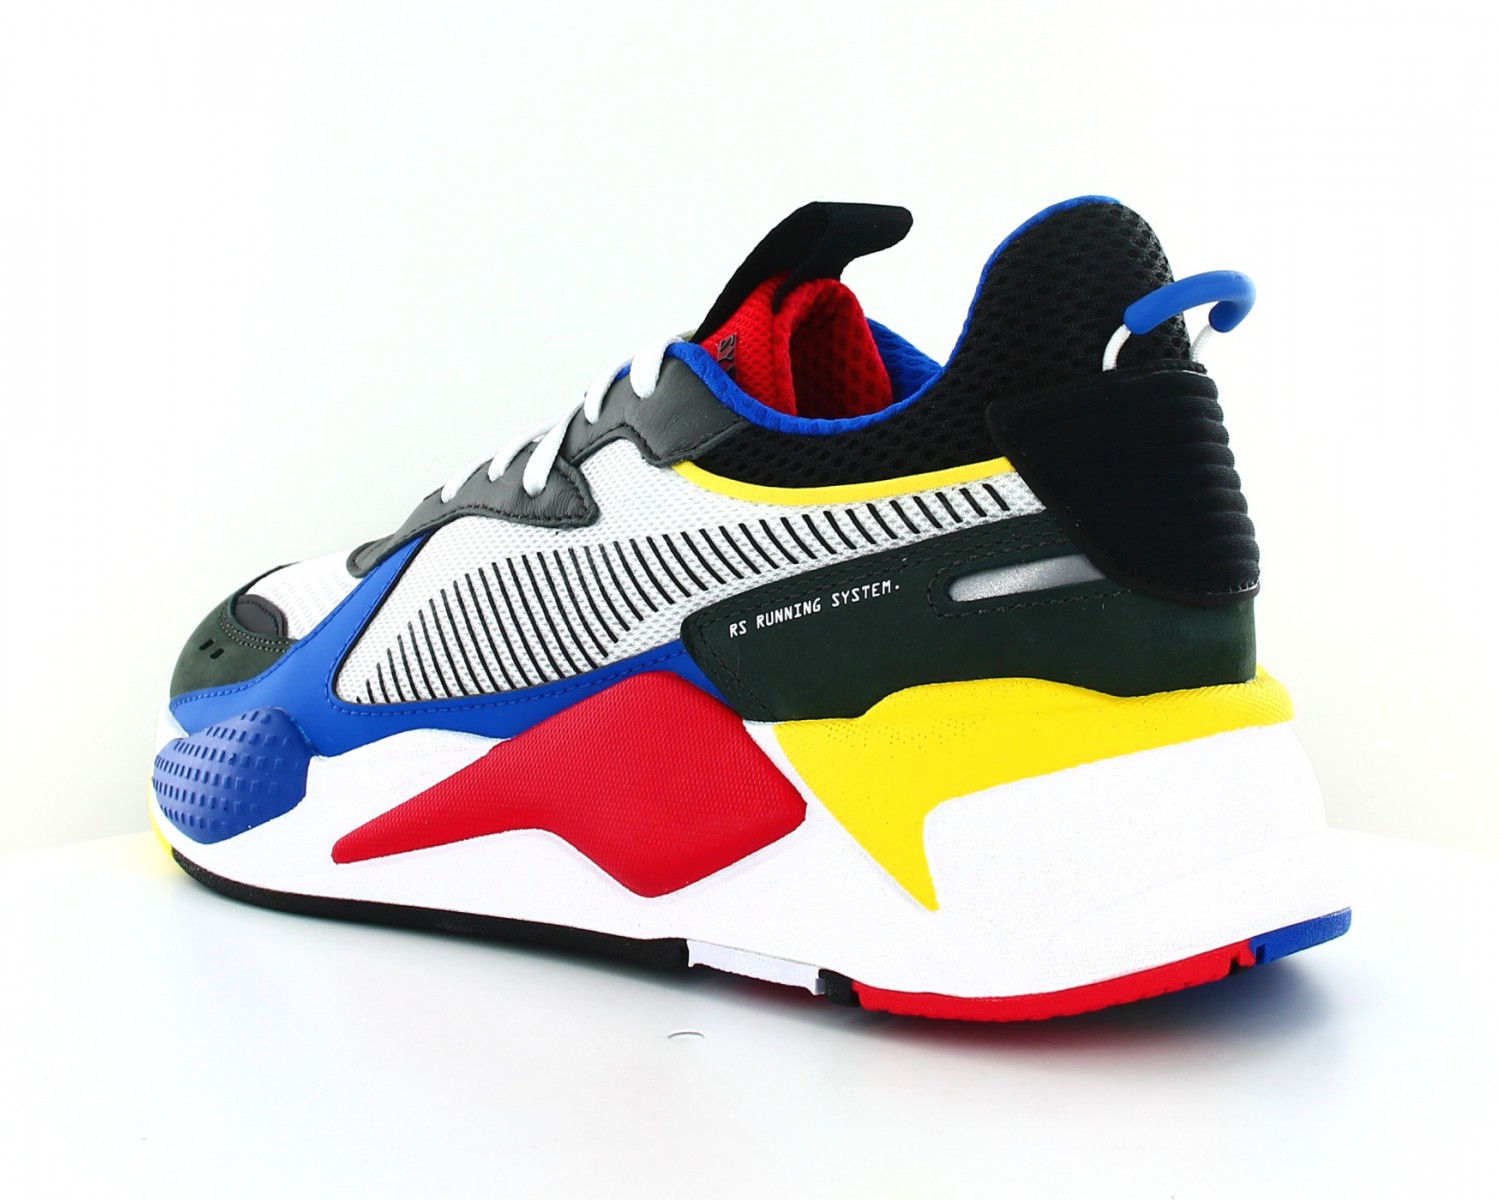 puma rs x homme toys